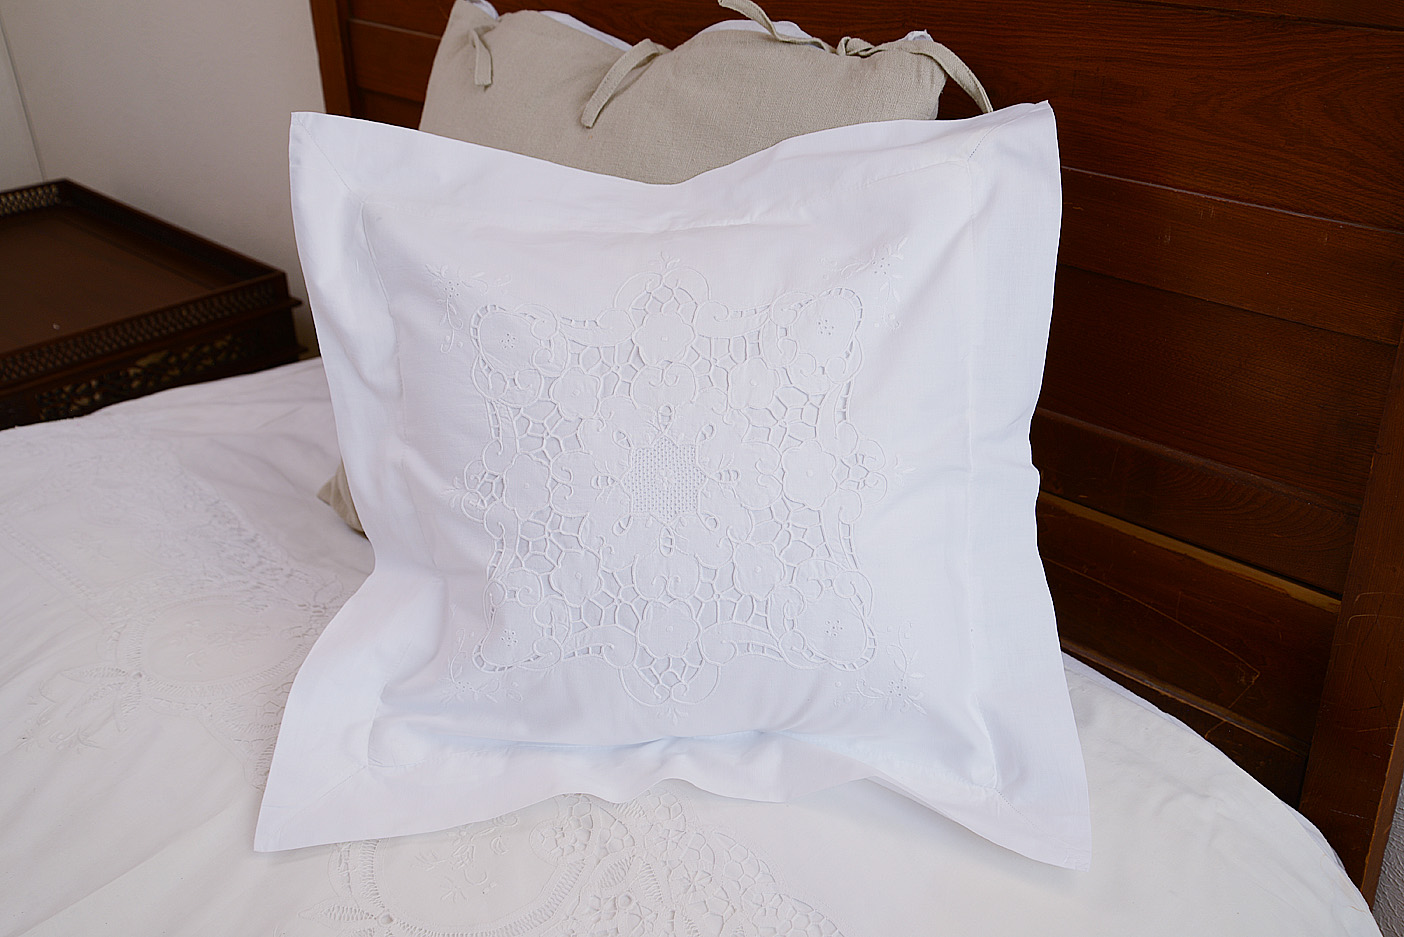 victorian hand embroidered cotton pillow sham, 18" x 18" square.